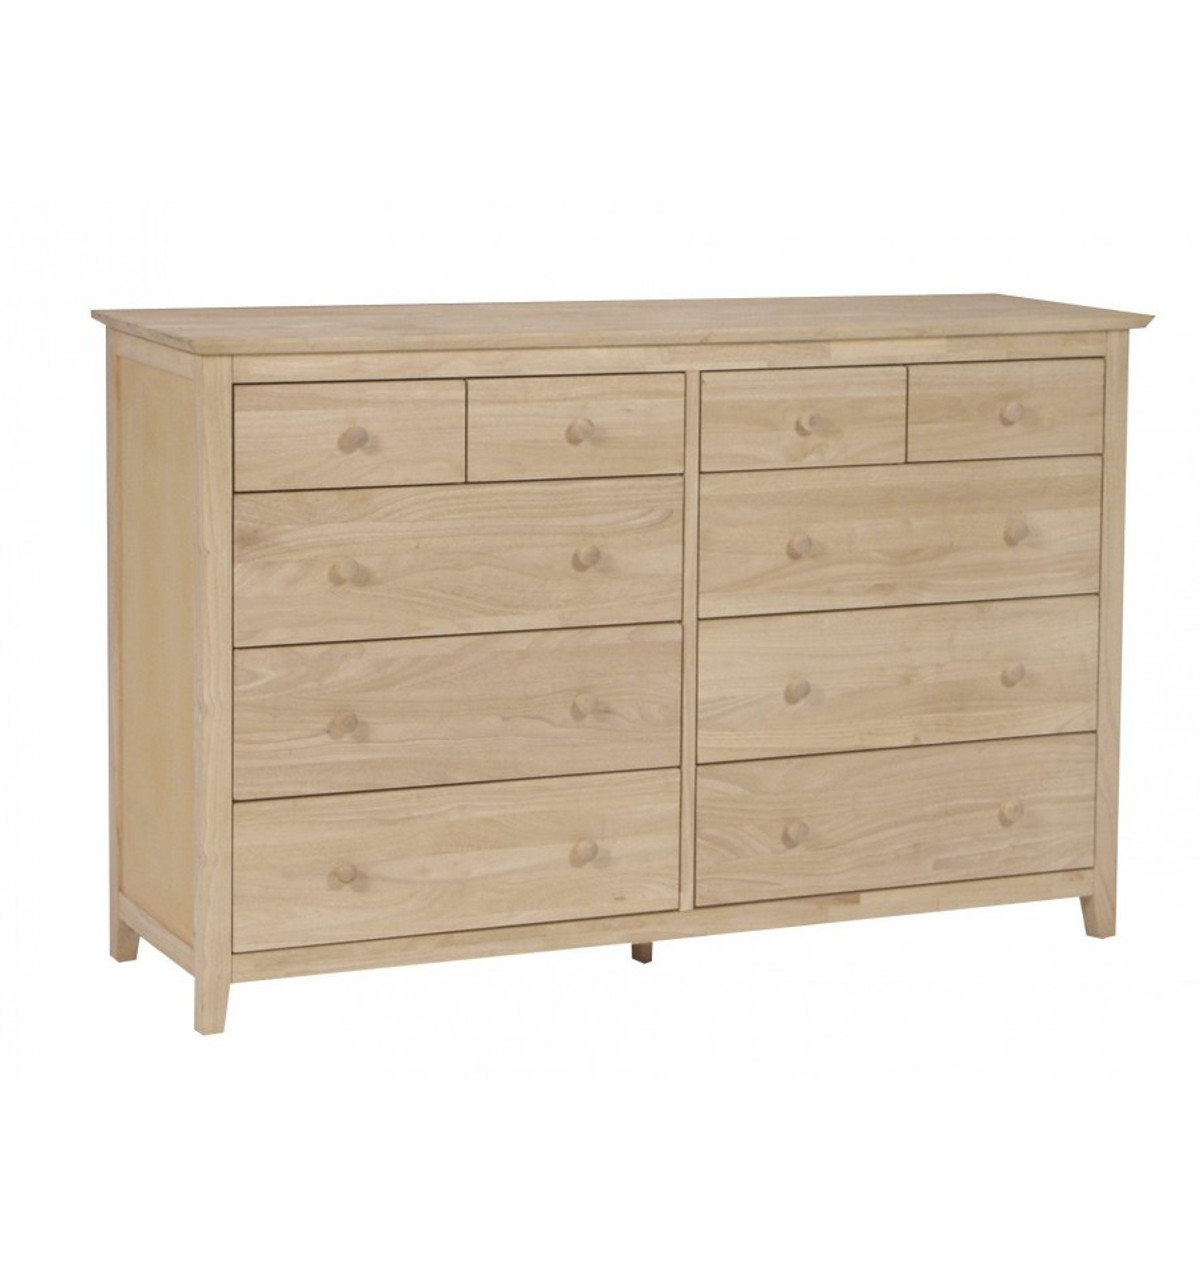 Thomasville Dresser With 10 Drawers Whitewood Furniture